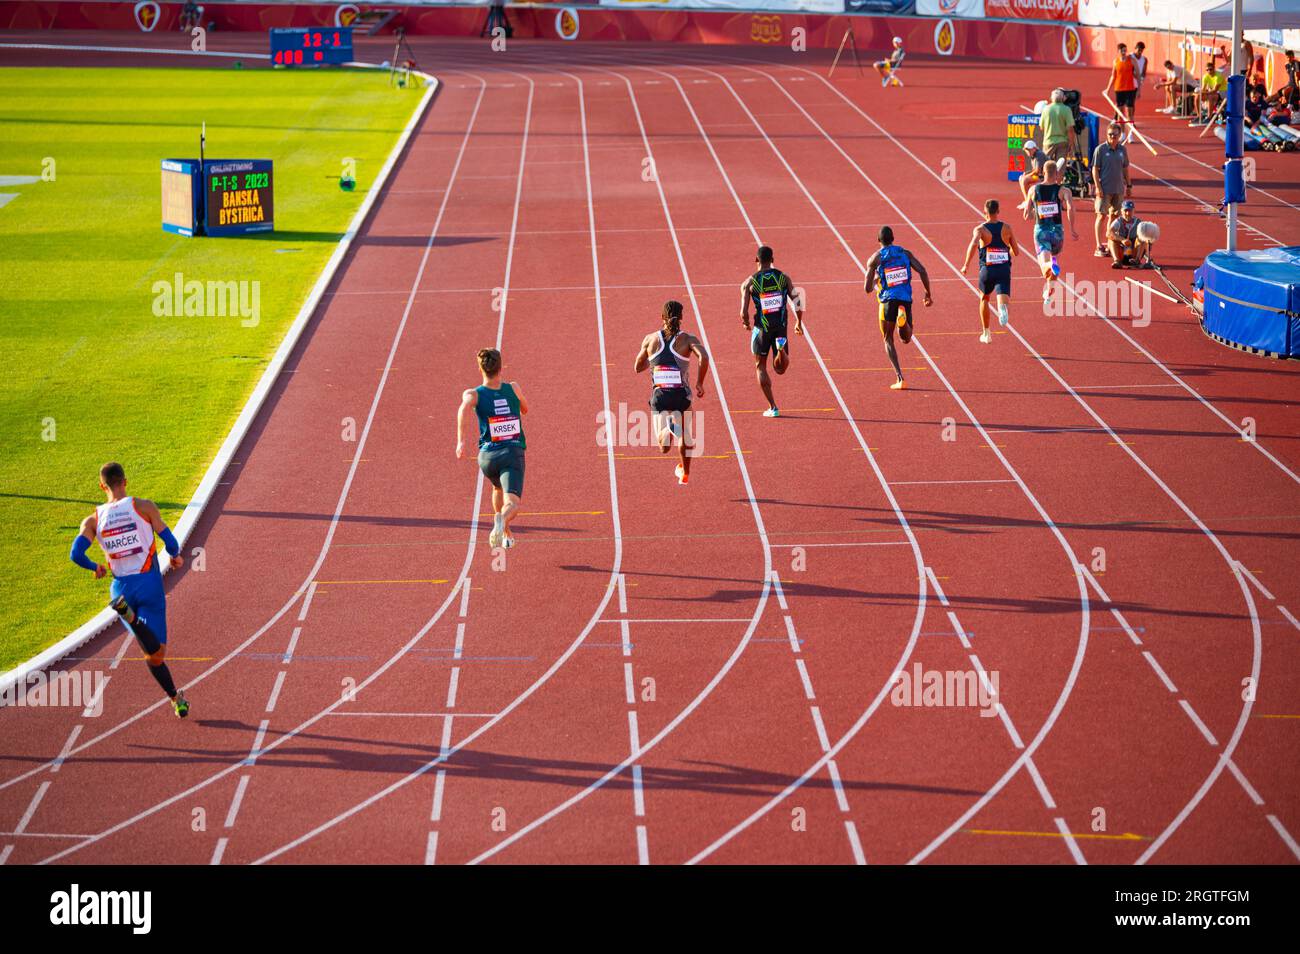 B. BYSTRICA, SLOWAKEI, 20. JULI 2023: Men Sprinters strive in 400m Race BATH in Serene Sunset Ambiance on Track and Field Platform for Worlds in Bud Stockfoto